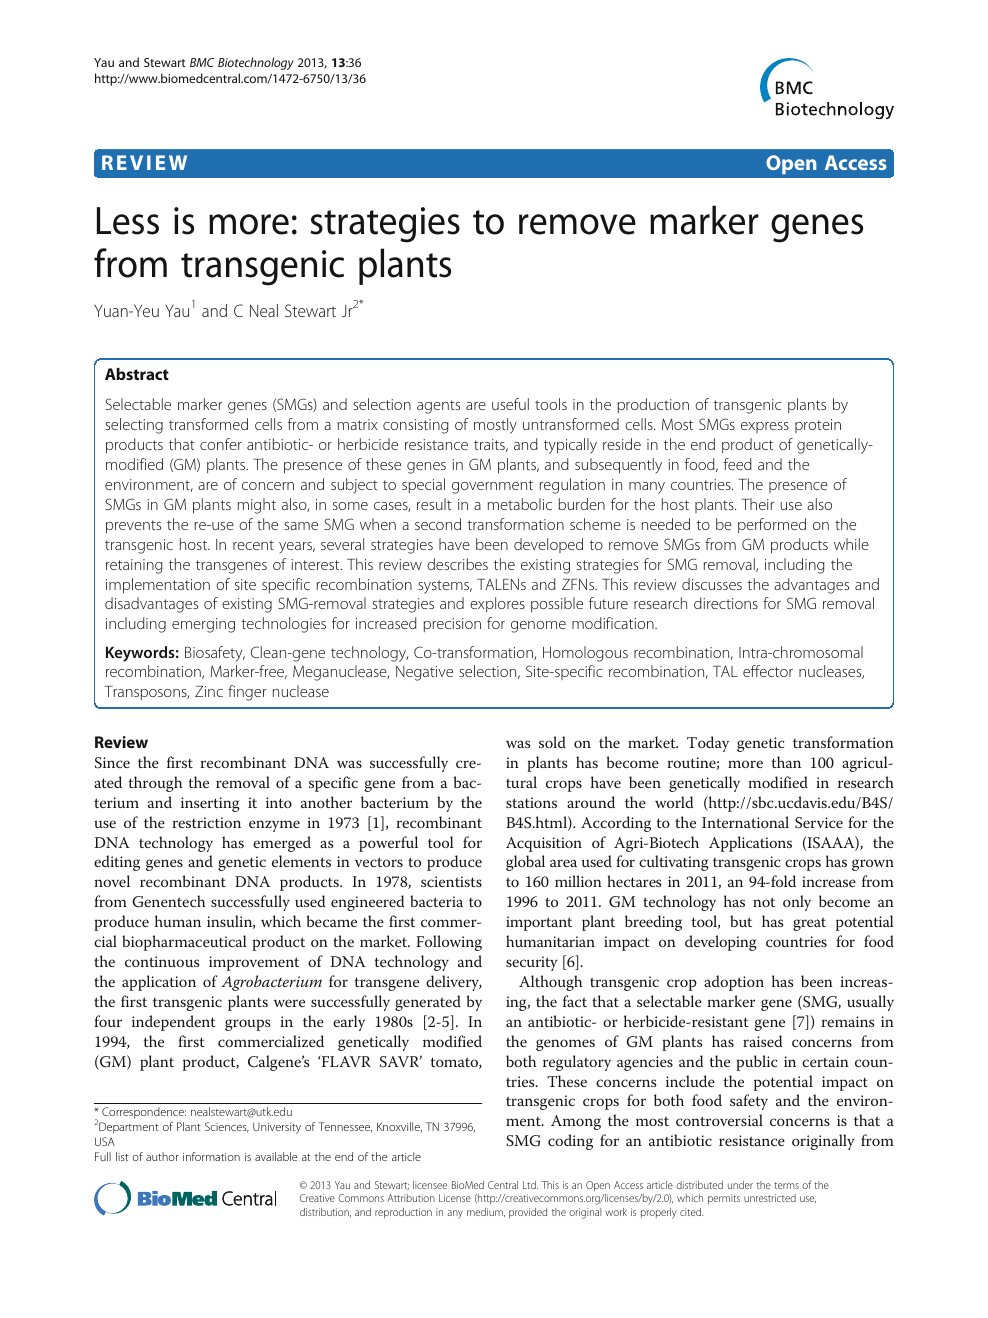 Less Is More Strategies To Remove Marker Genes From Transgenic